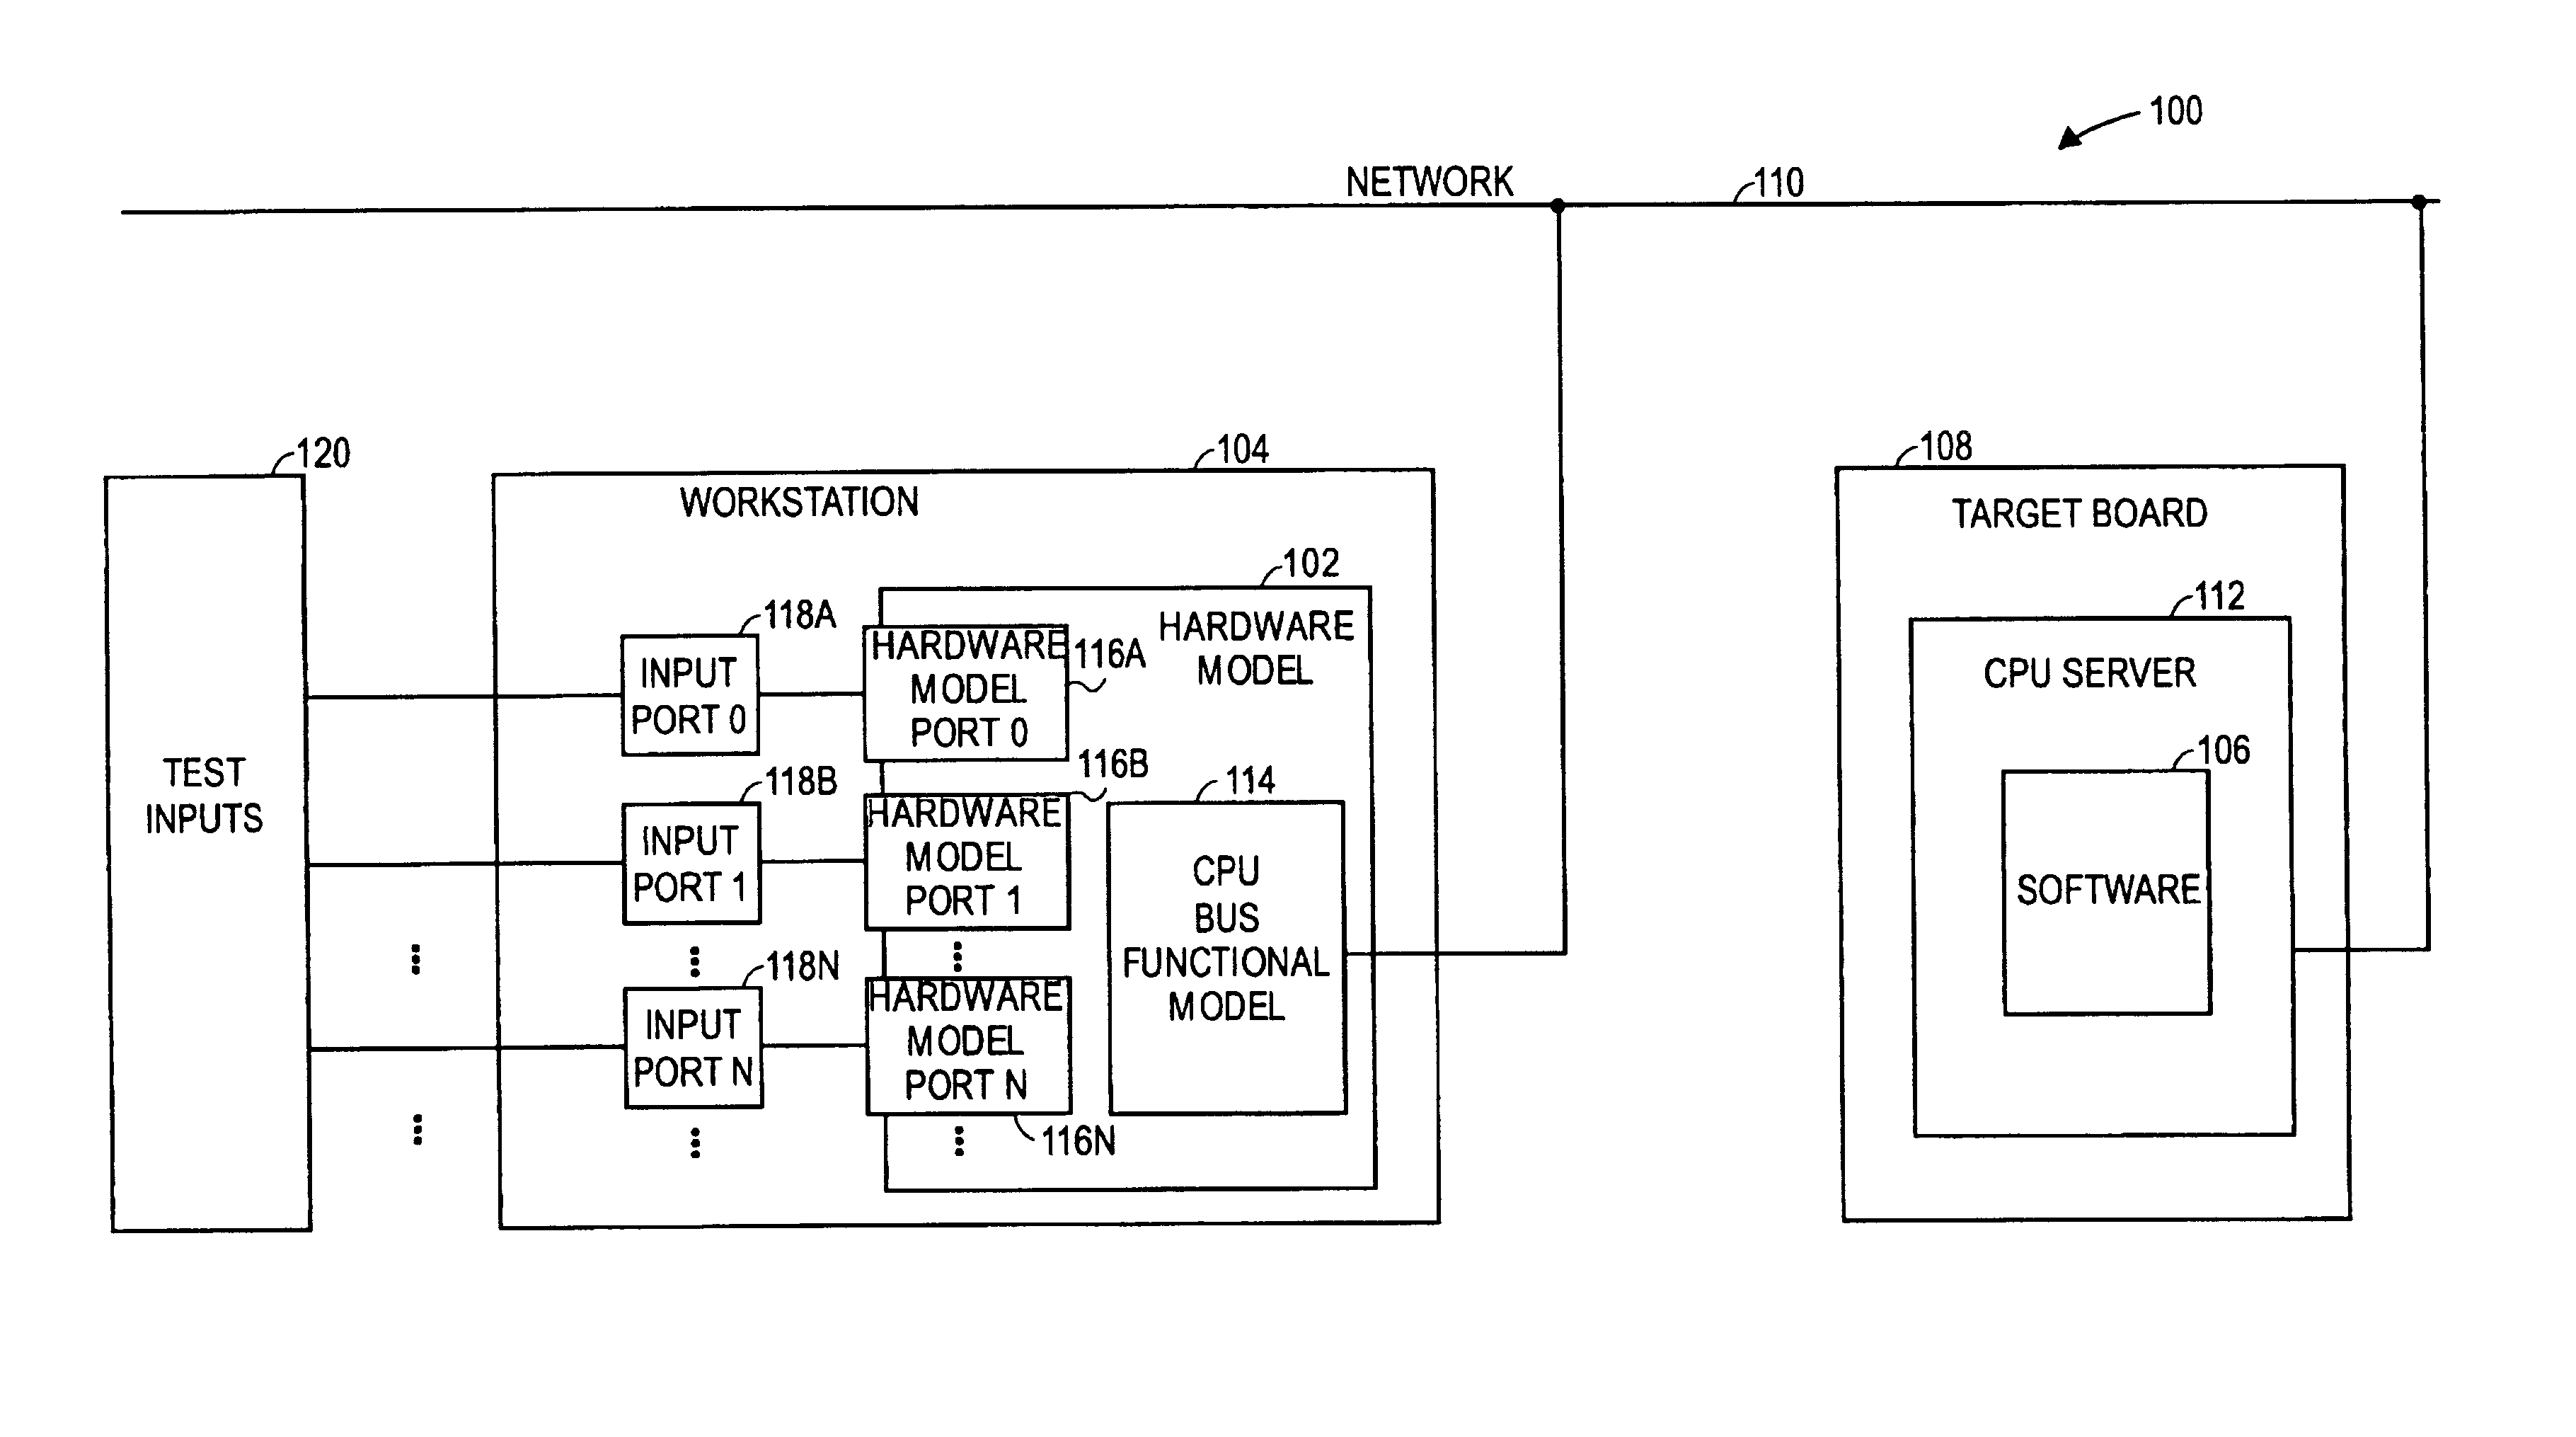 Method and apparatus for hardware and software co-simulation